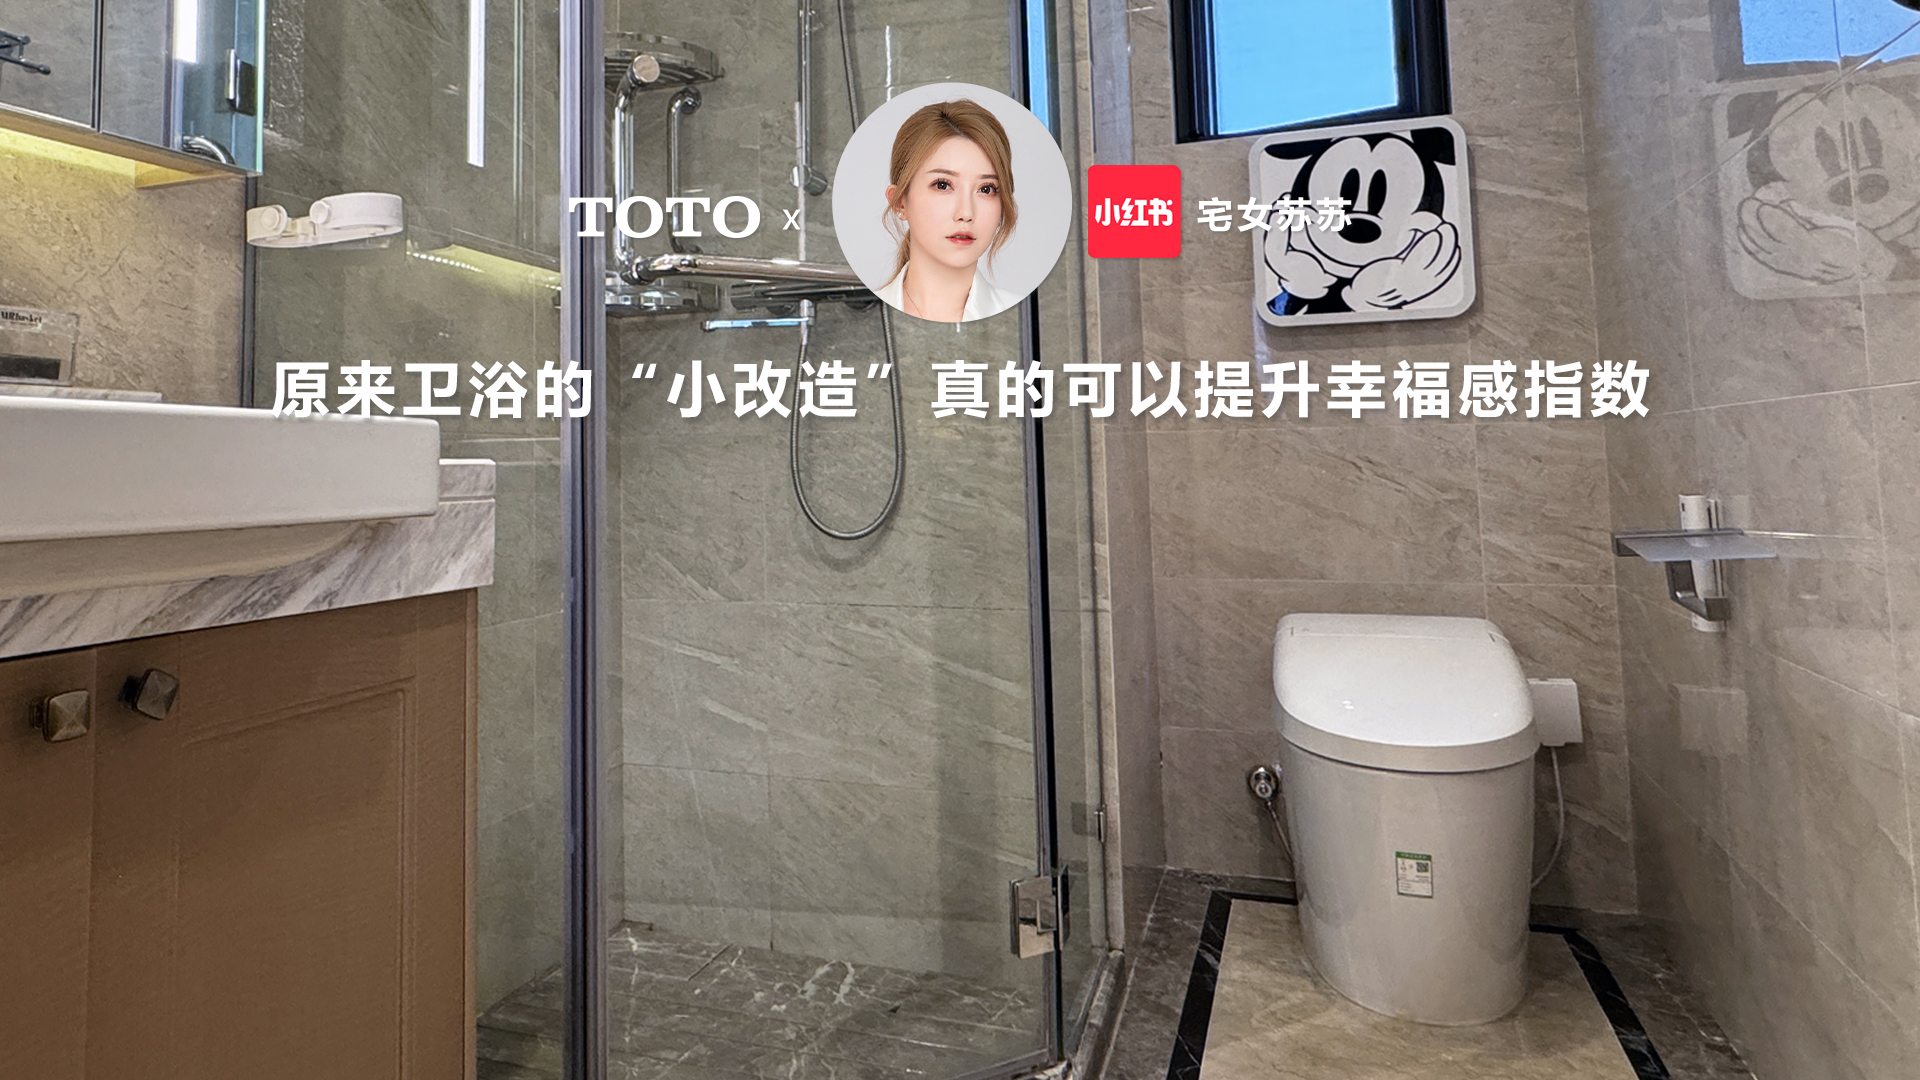  It turns out that the "minor renovation" of bathroom can really improve the happiness index